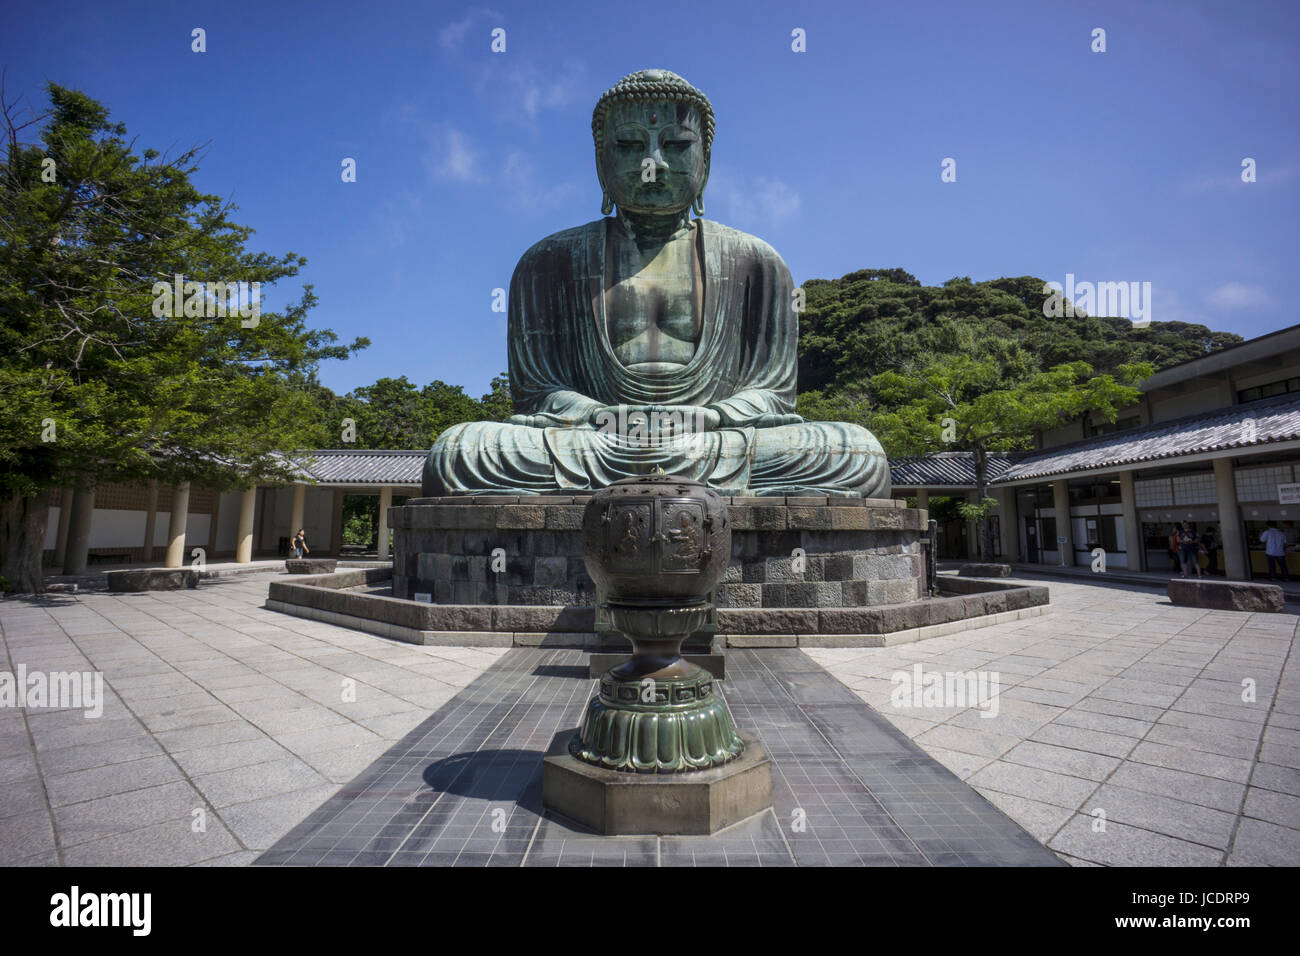 Kamakura, Japan - August 7, 2014: The Great Buddha of Kamakura (Kamakura Daibutsu) is a bronze statue of Amida Buddha, which stands on the grounds of Kotokuin Temple. With a height of 13.35 meters, it is the second tallest bronze Buddha statue in Japan, surpassed only by the statue in Nara's Todaiji Temple. Stock Photo